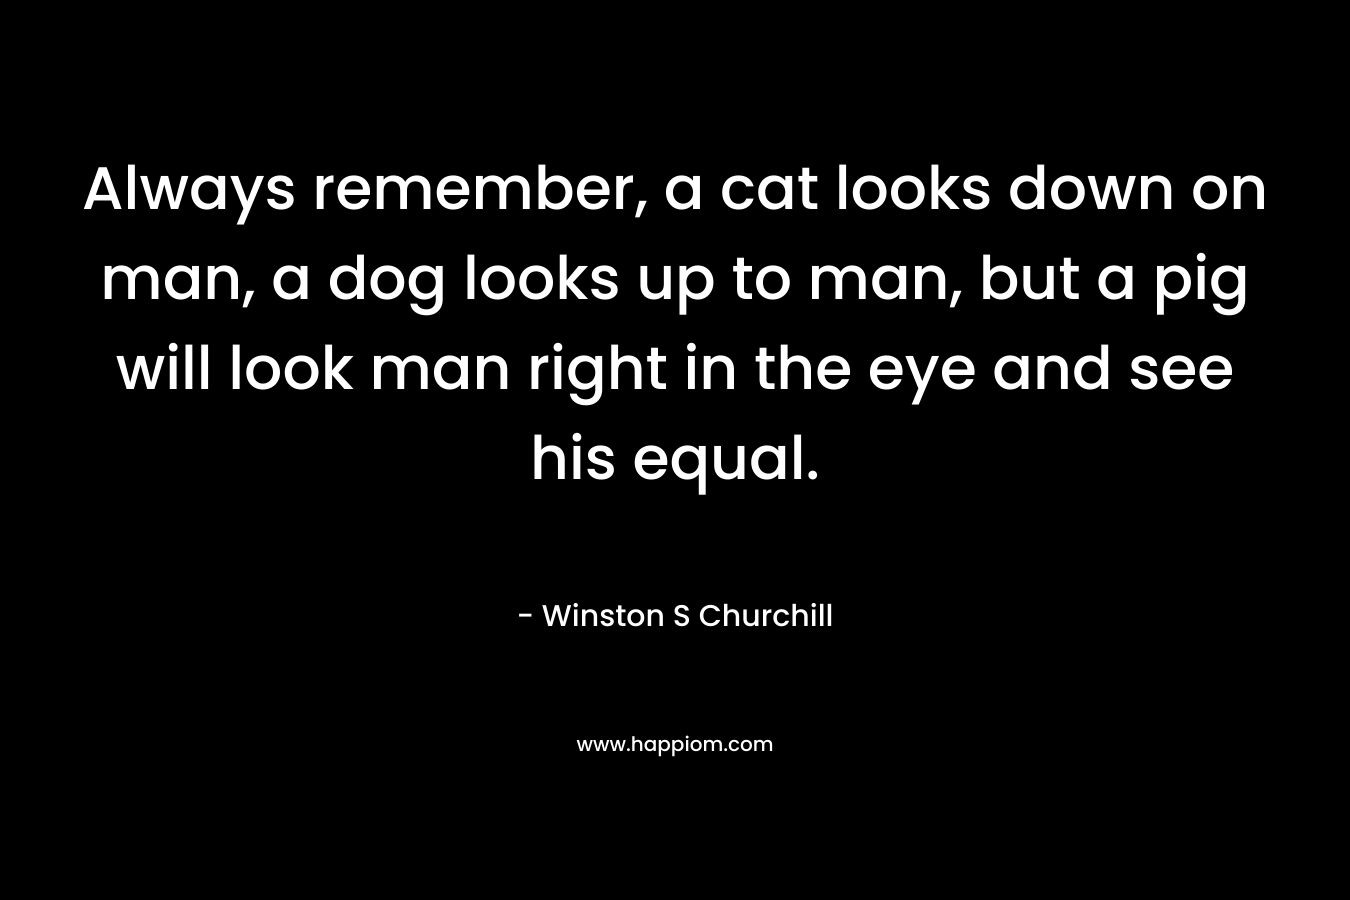 Always remember, a cat looks down on man, a dog looks up to man, but a pig will look man right in the eye and see his equal.